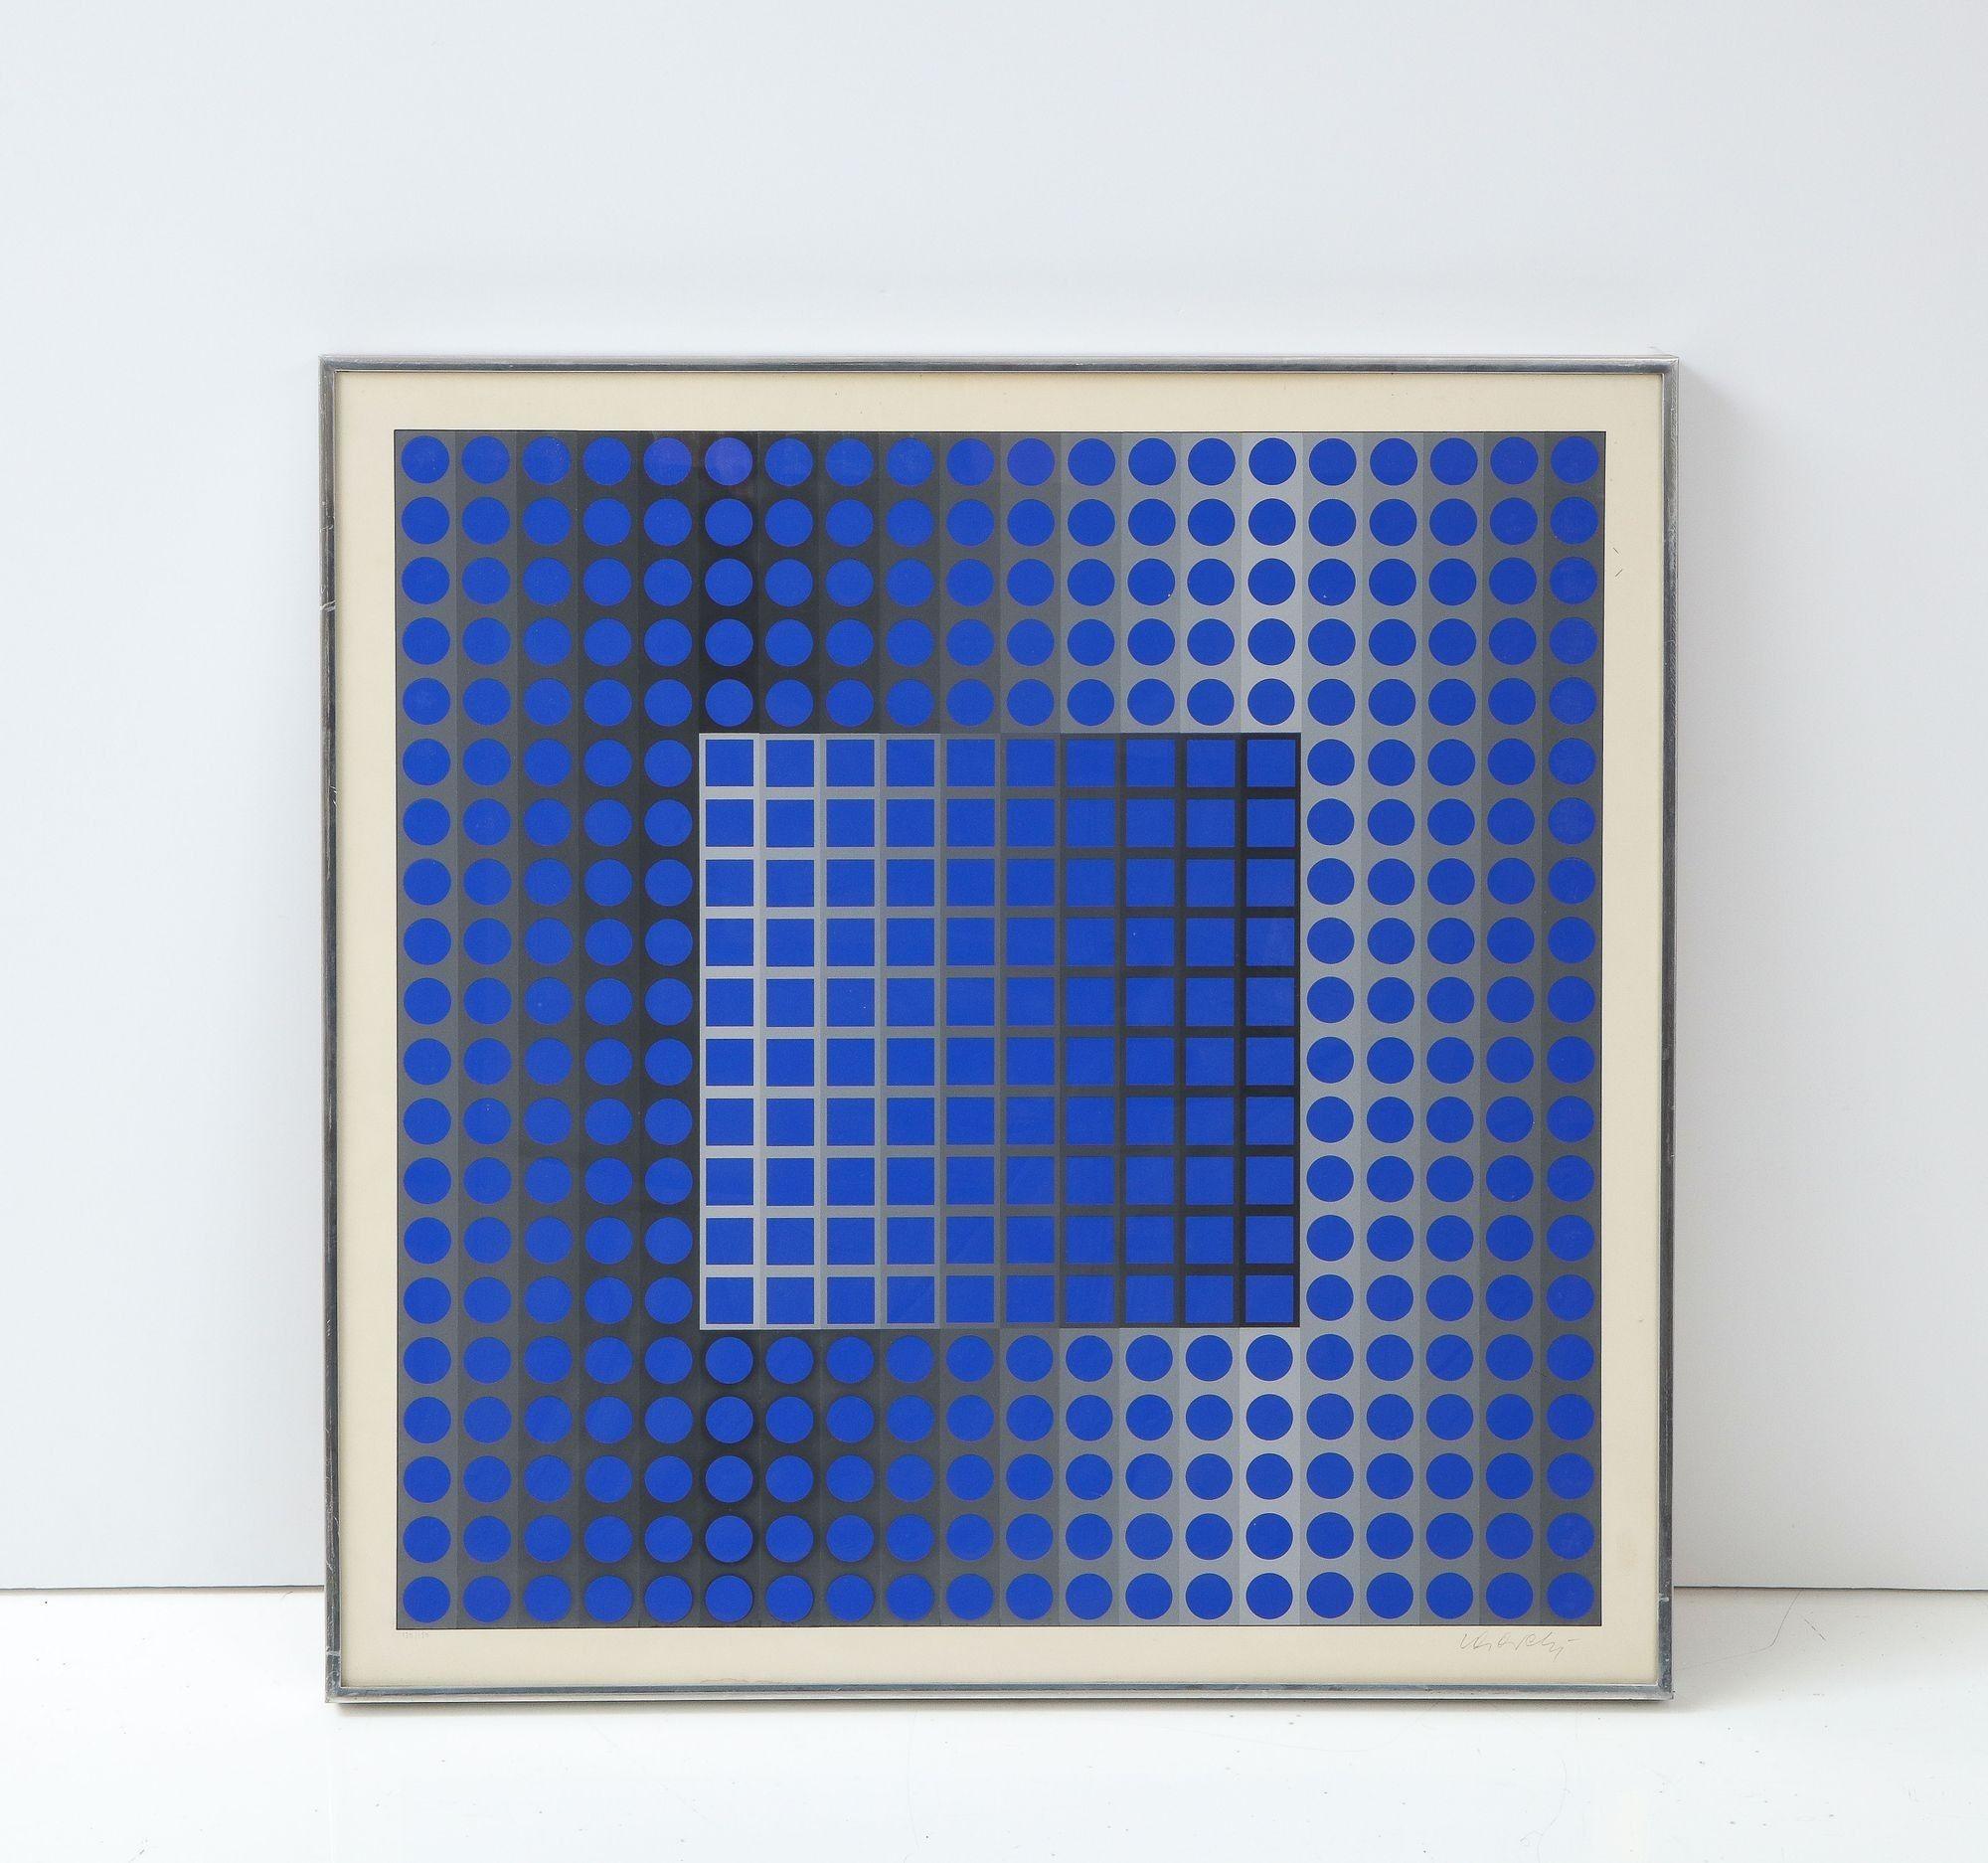 A great print by the Op Art master Victor Vasarely in this silk screen Print Zett-KSZ